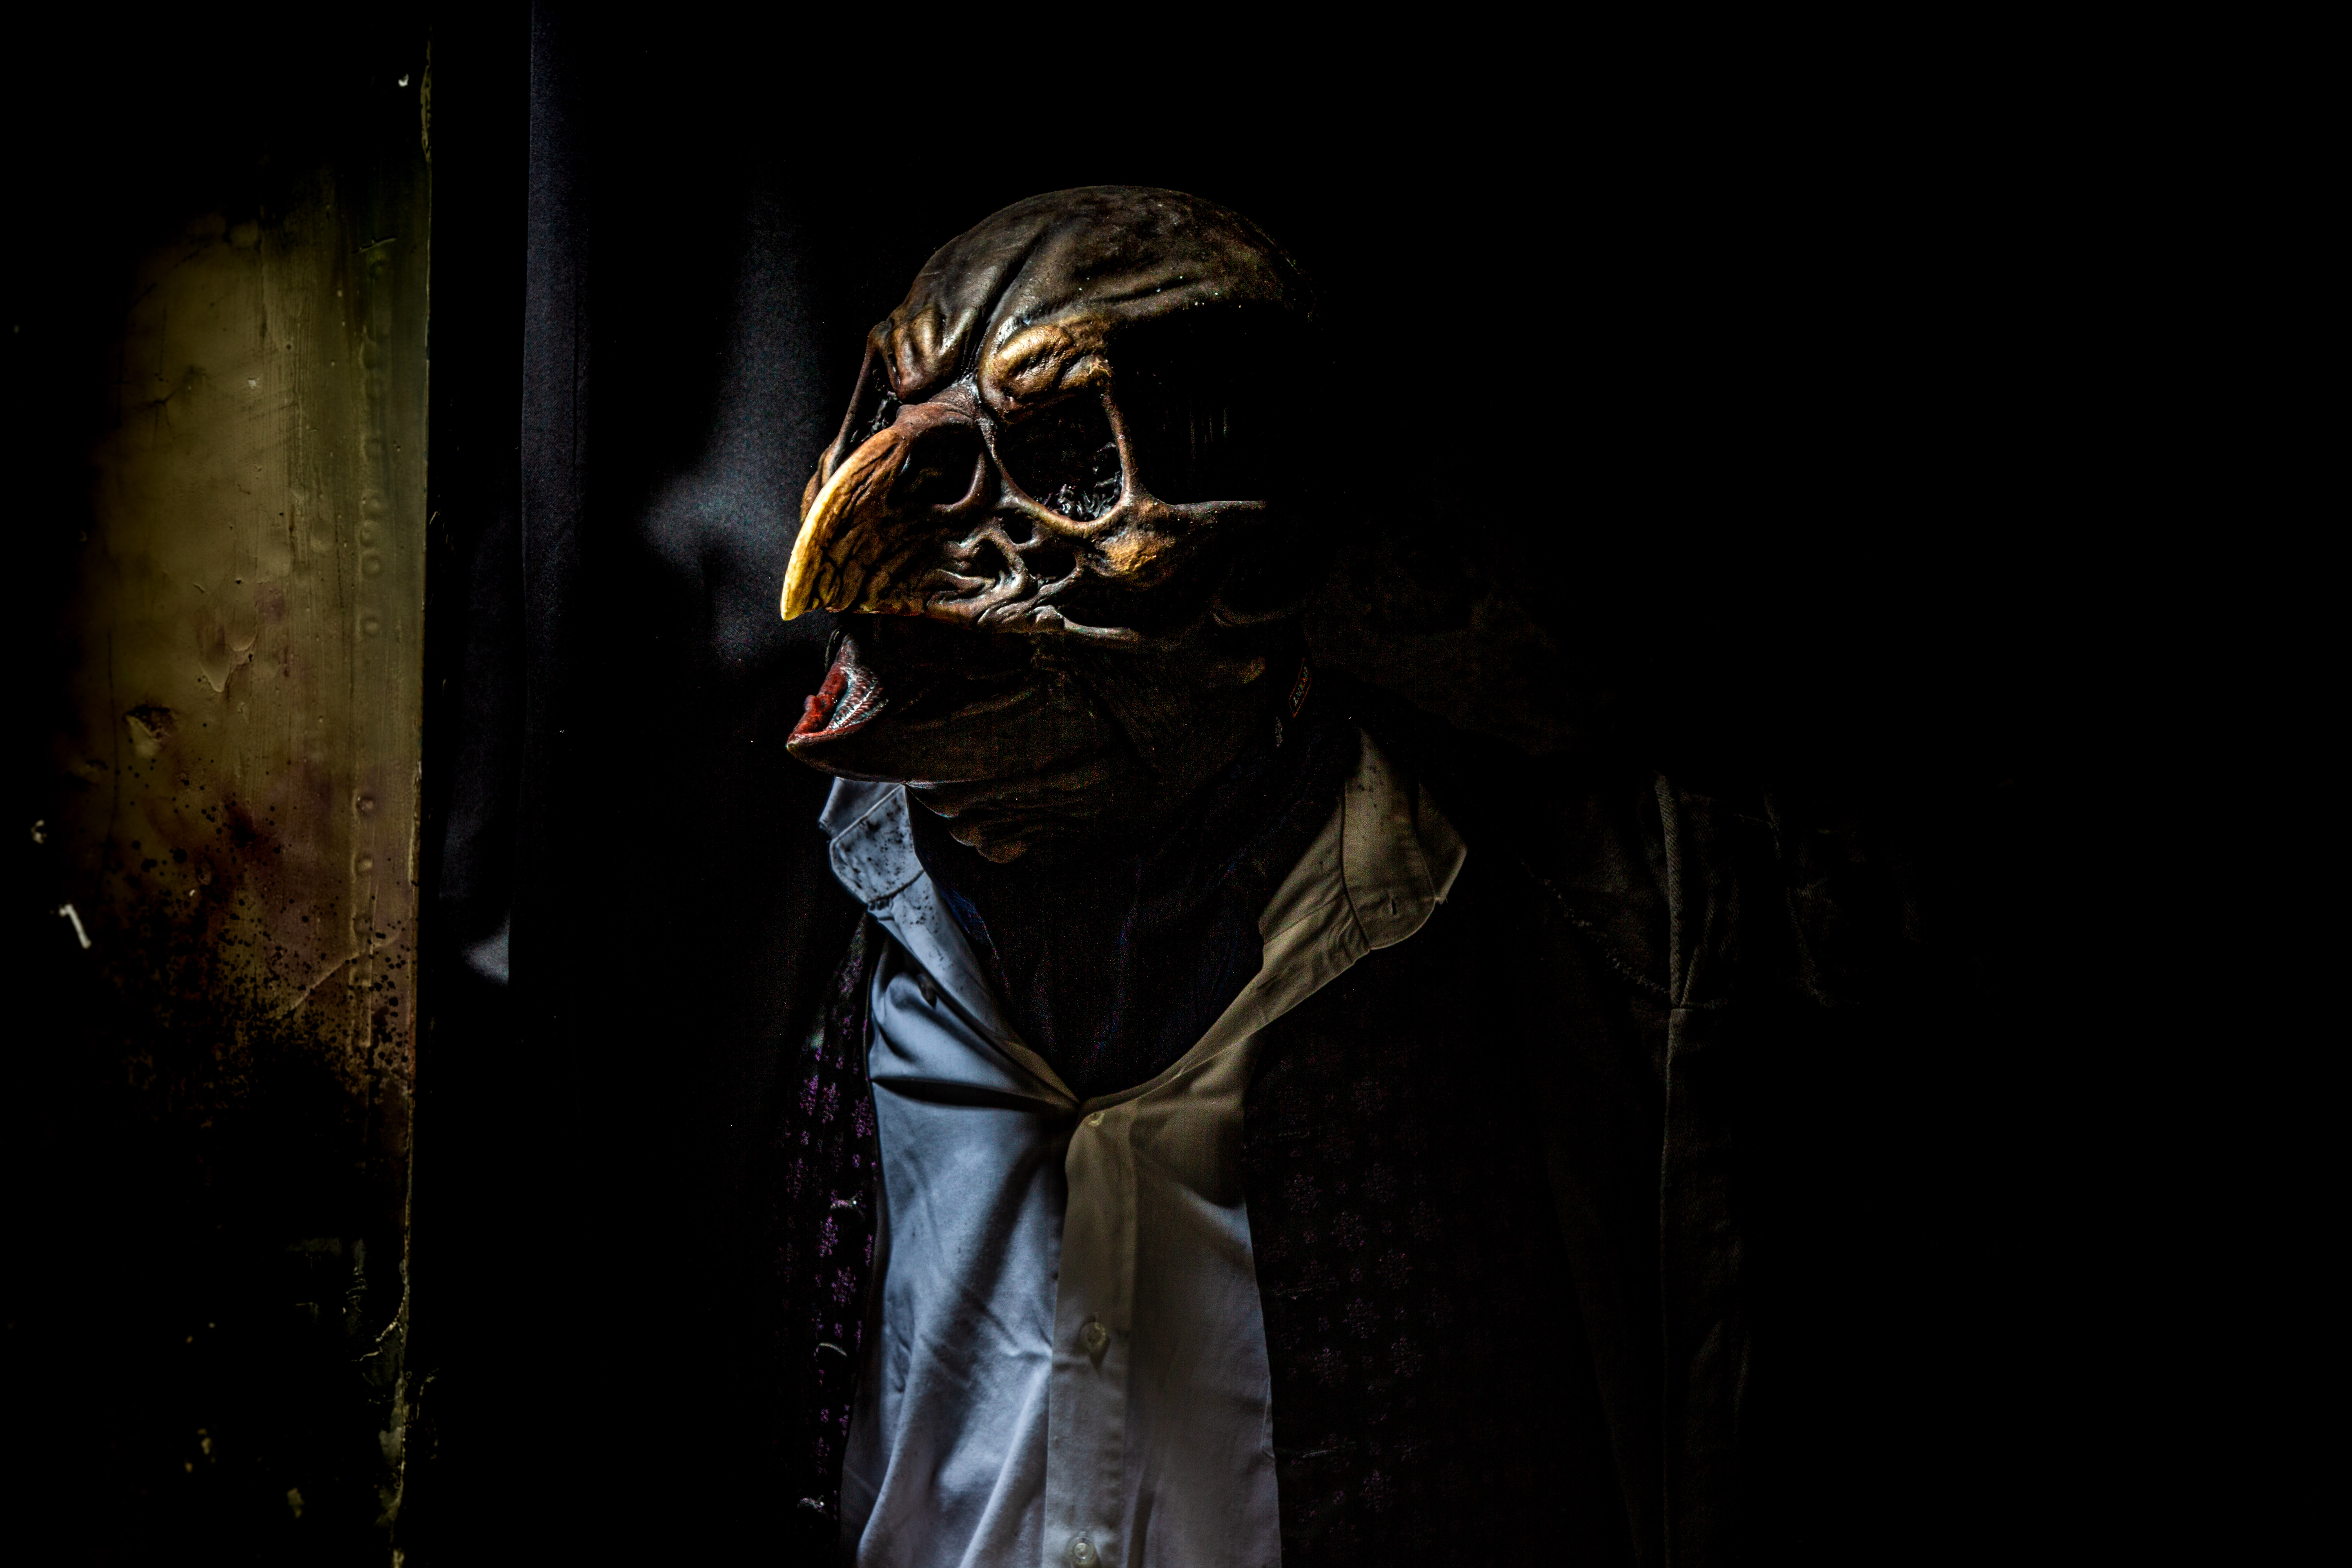 The Nevermore Haunt Returns for Its 6th Halloween Season with Brand New Scenes and Scares